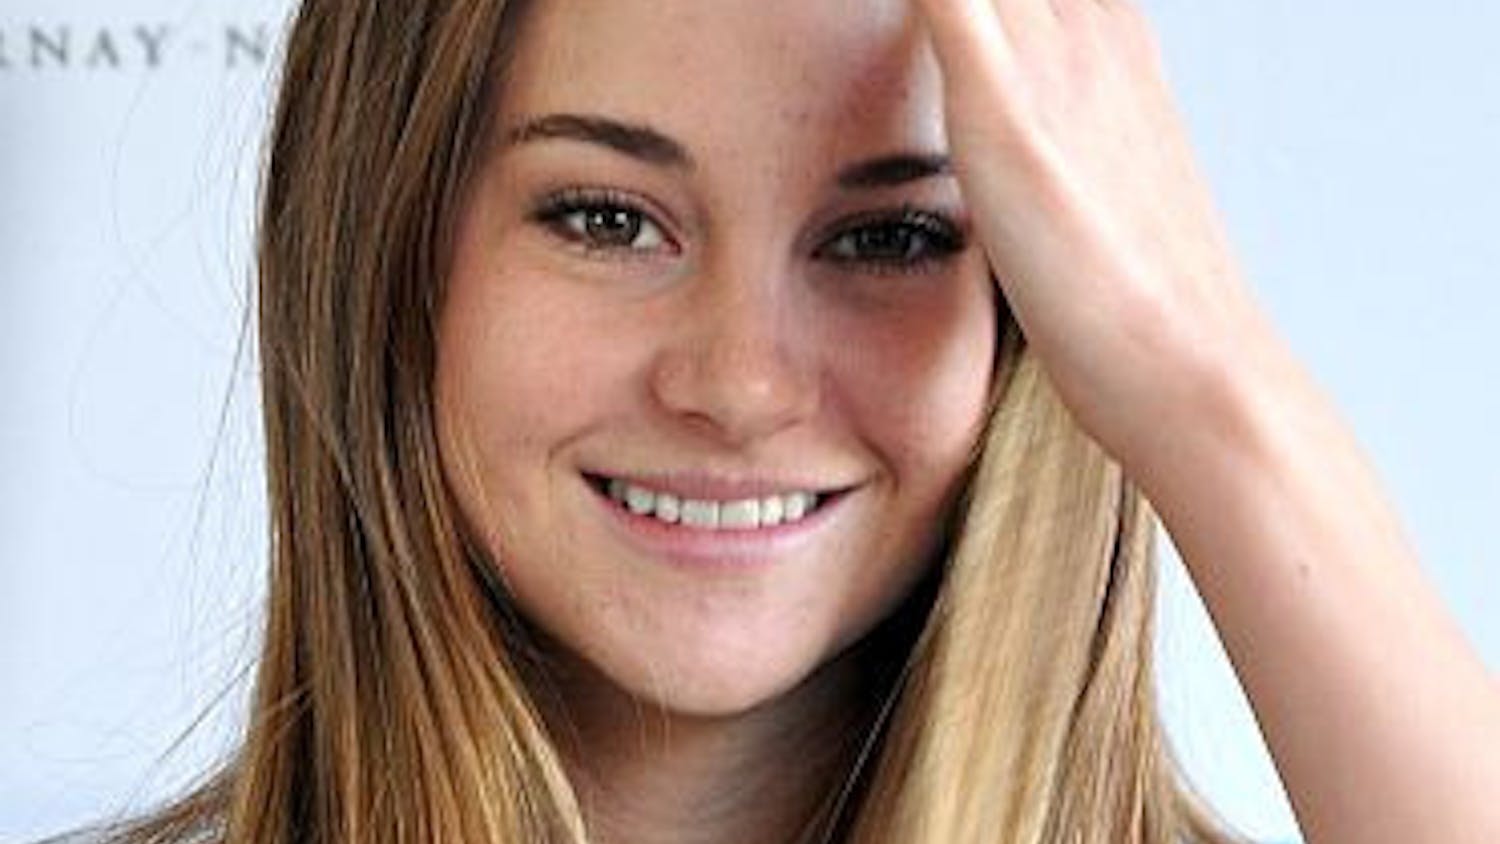 "Shailene Woodley" by Nick Step, used under CC BY 2.0